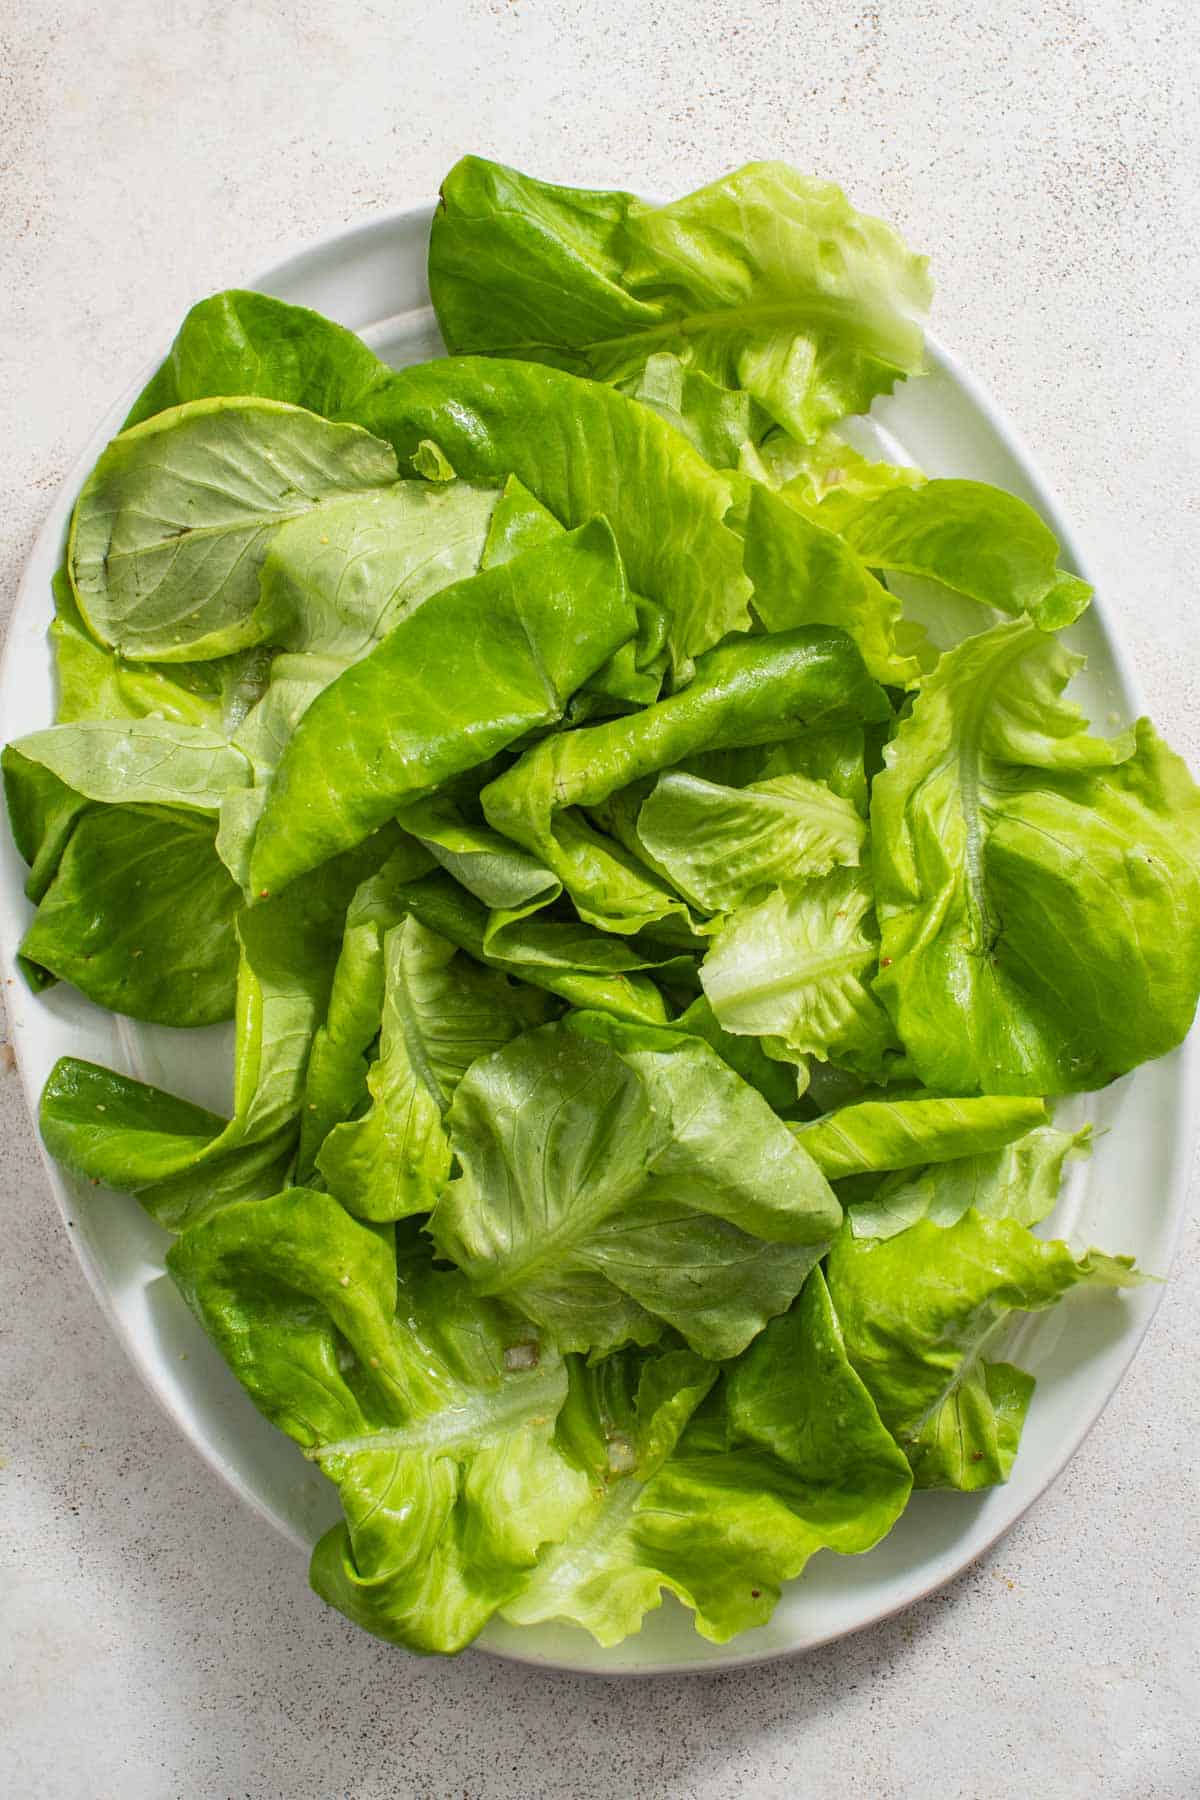 Dressed butter lettuce in a bowl.